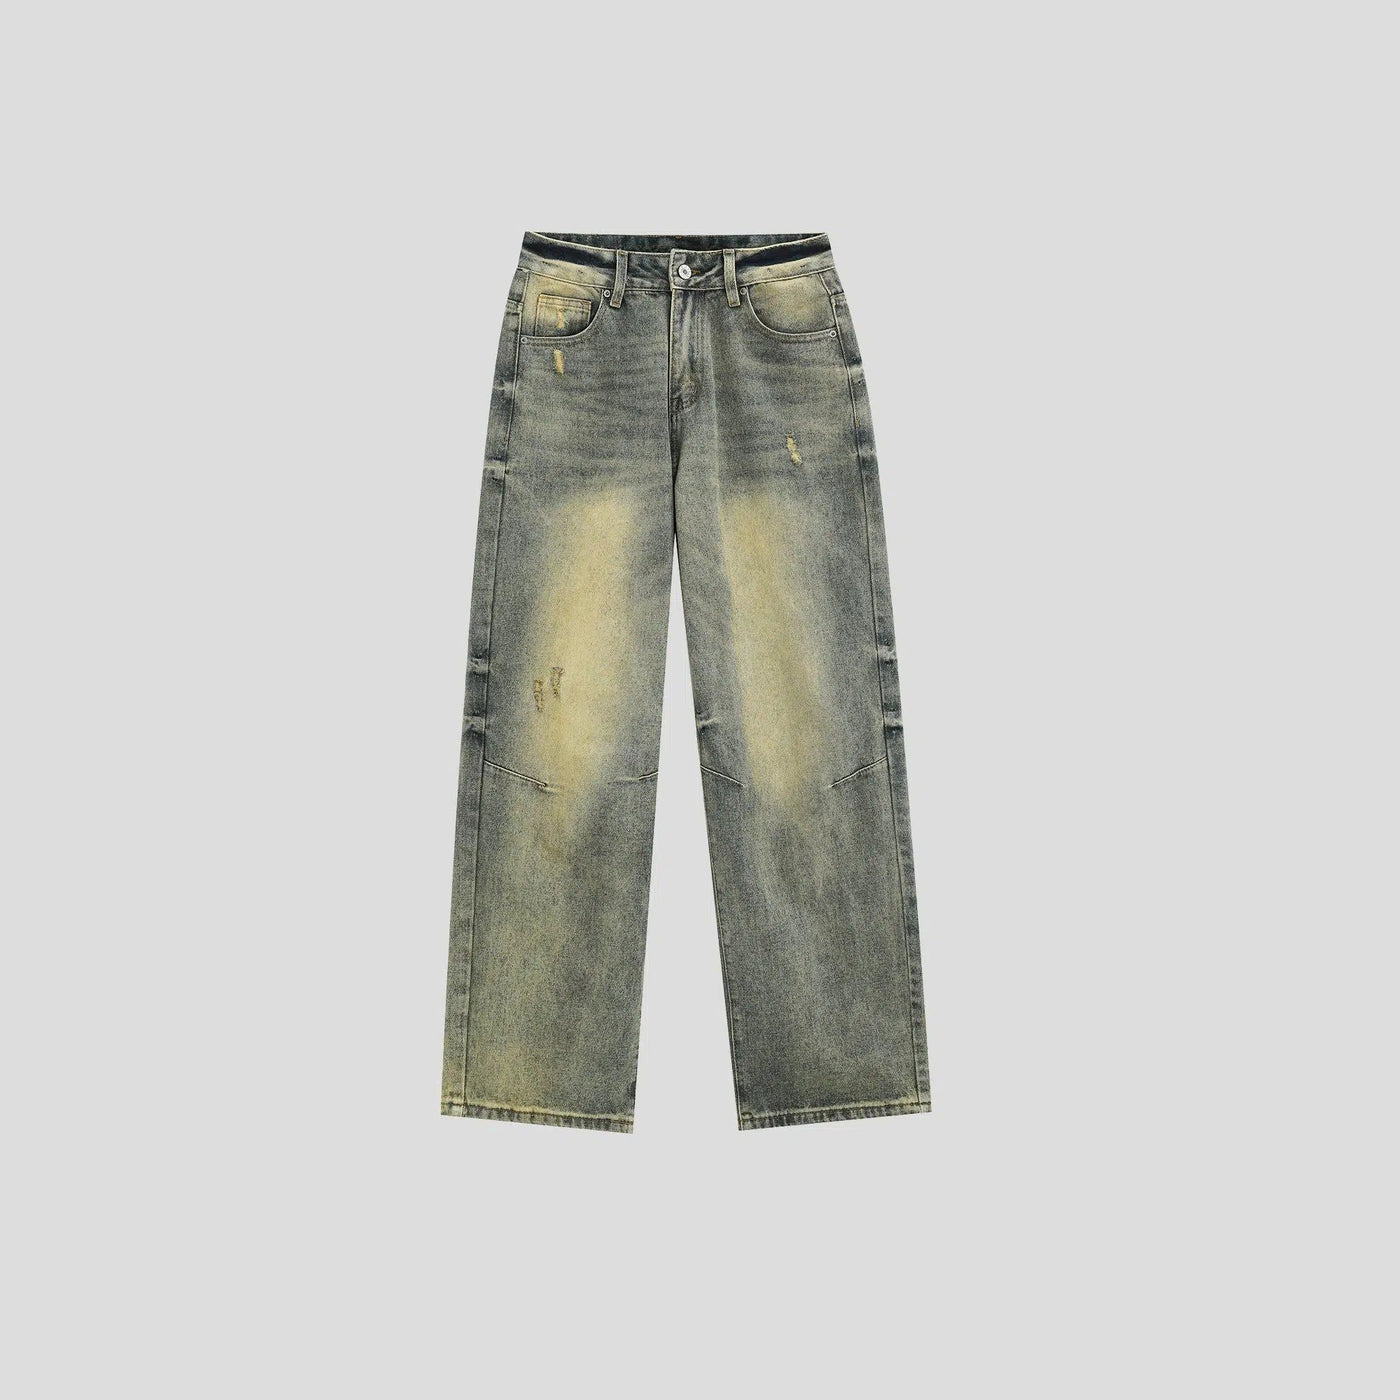 Yellow Fade Workwear Jeans Korean Street Fashion Jeans By INS Korea Shop Online at OH Vault